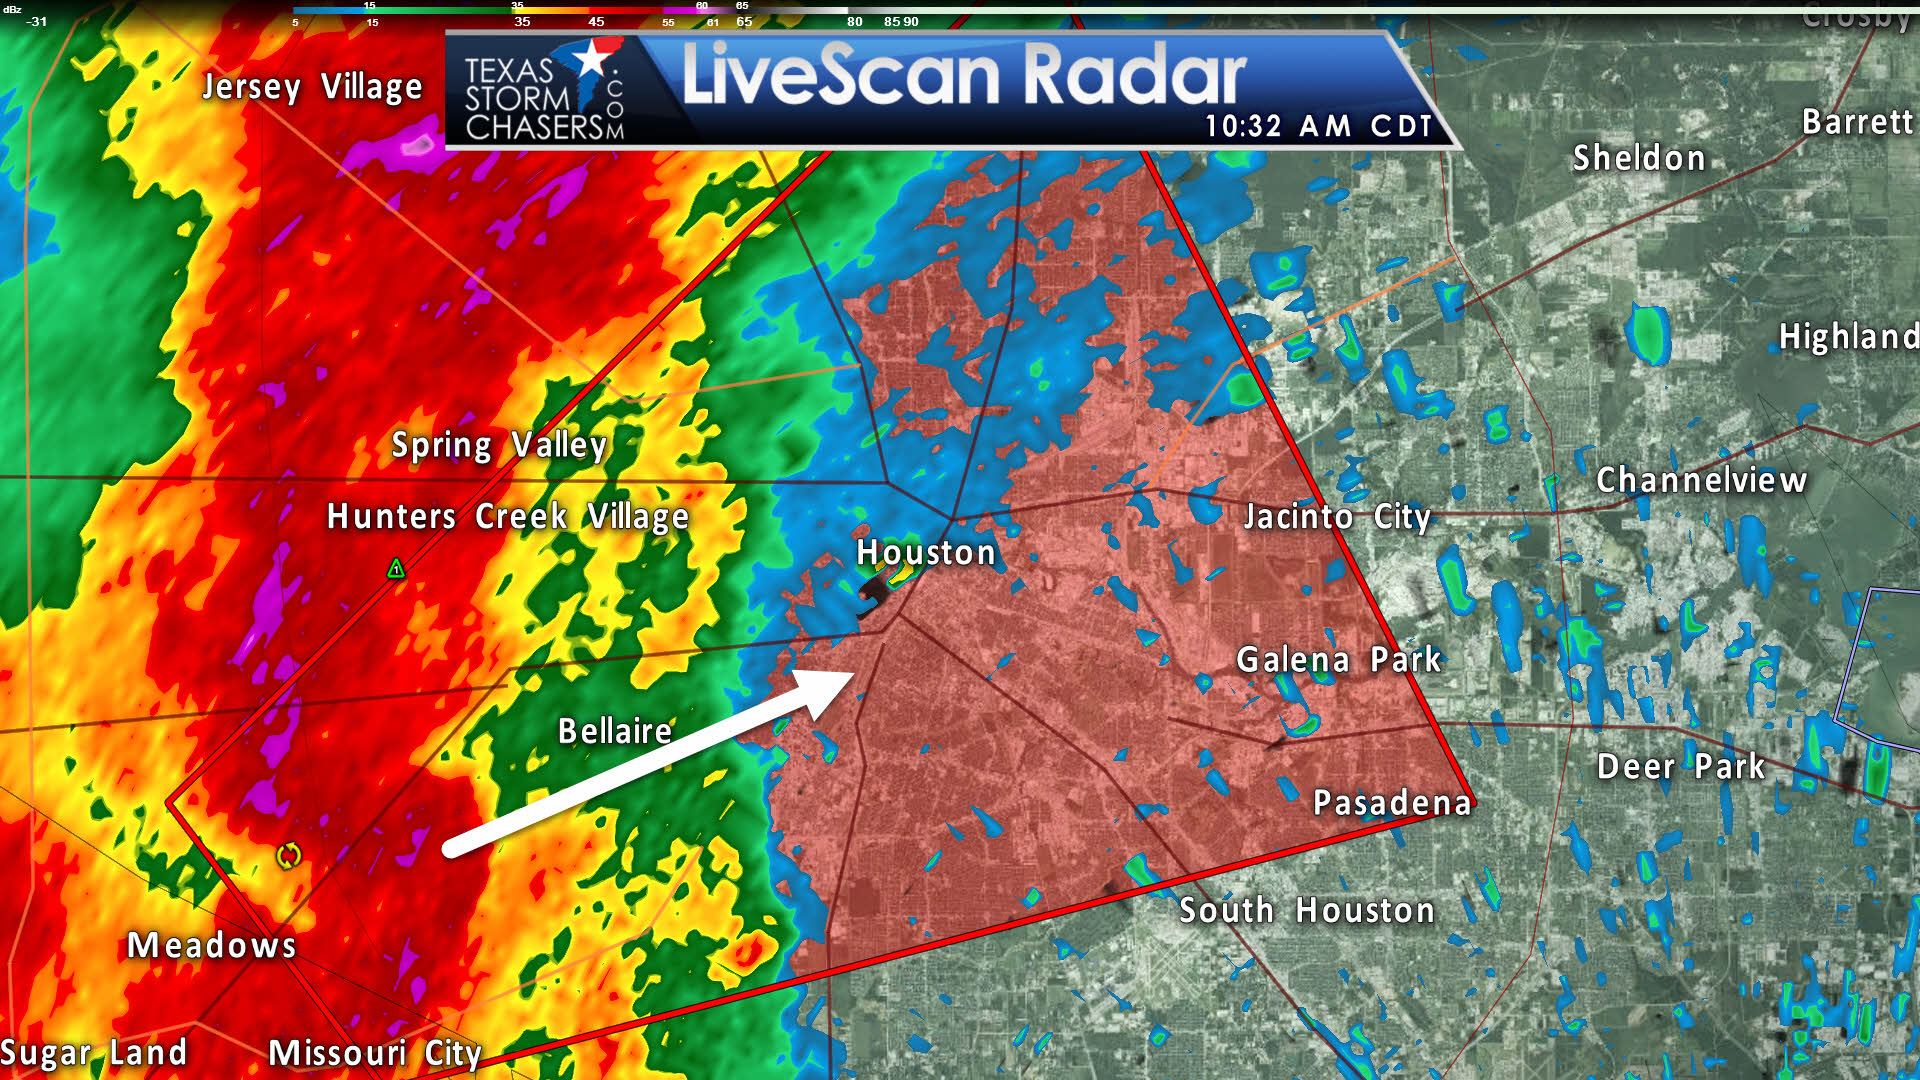 Tornado Warning for Houston (Harris County) till 11AM • Texas Storm Chasers